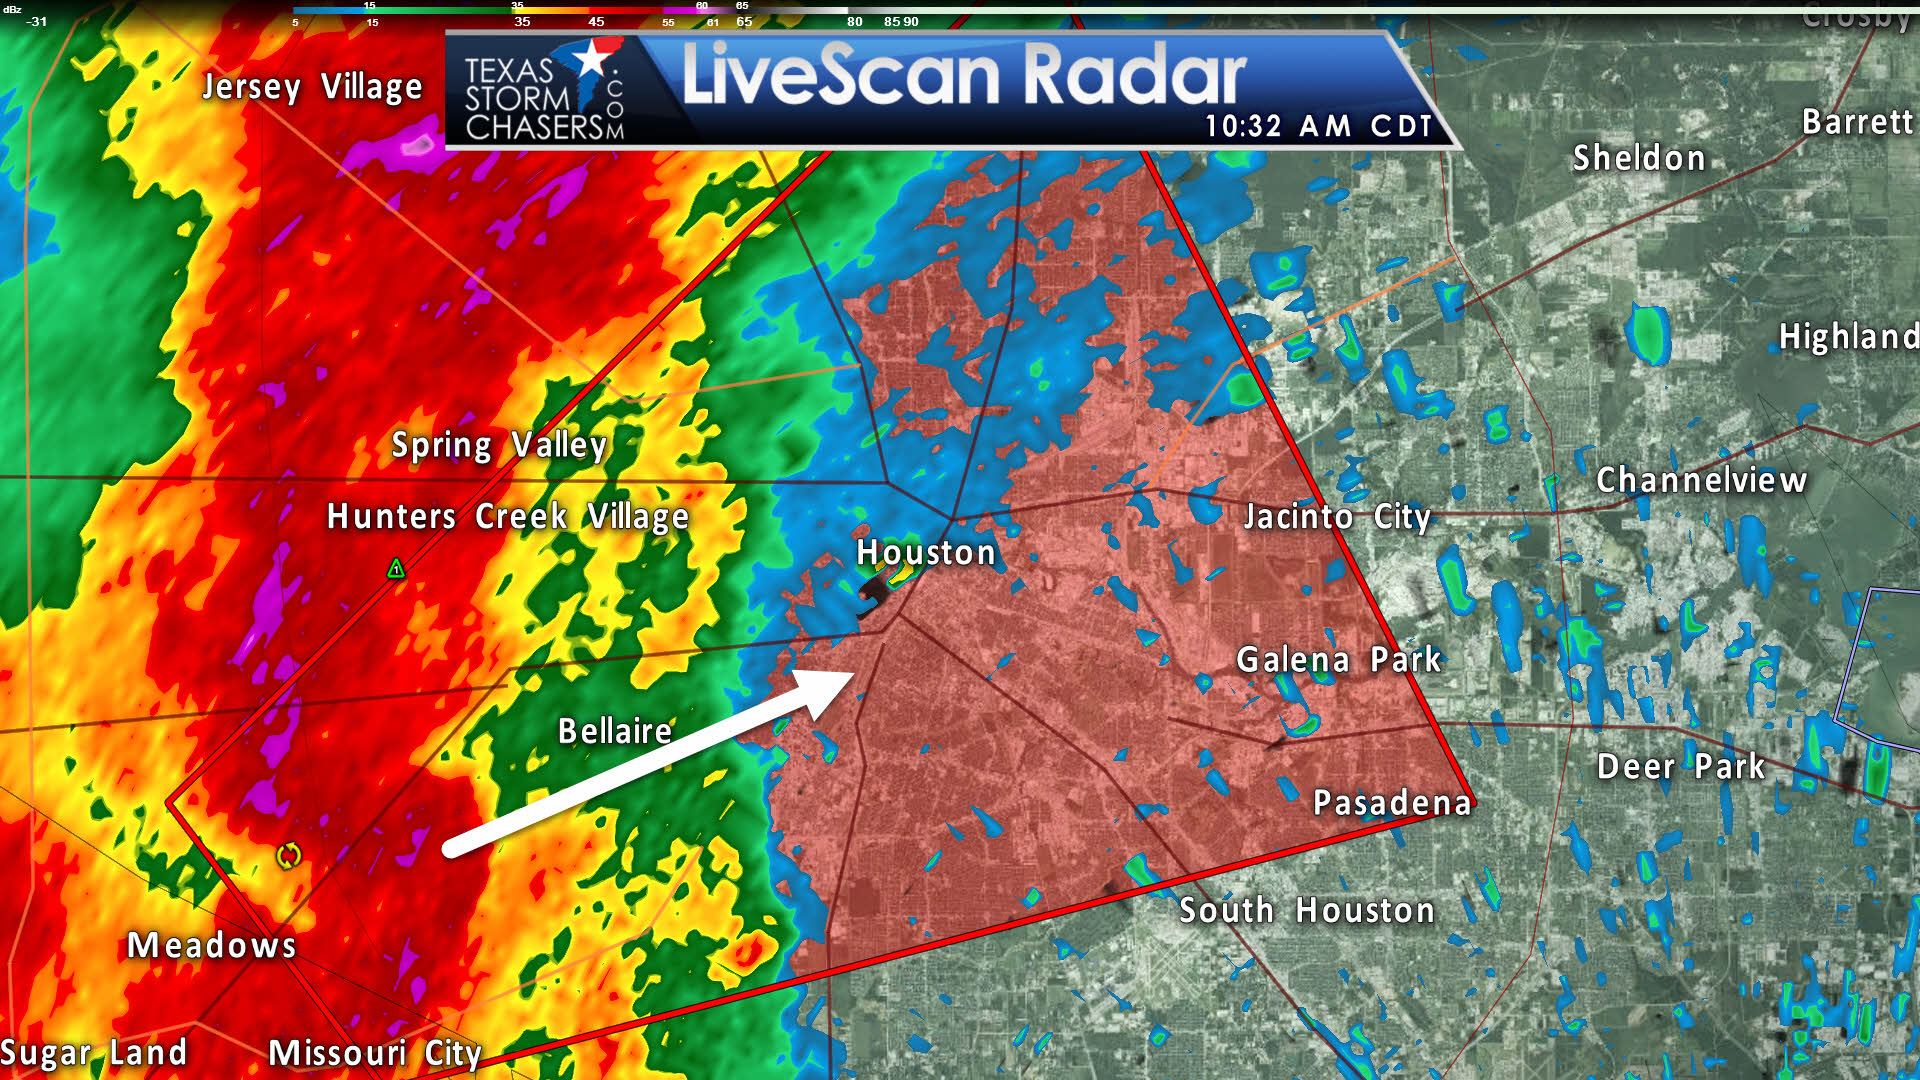 Tornado Warning for Houston (Harris County) till 11AM • Texas Storm Chasers